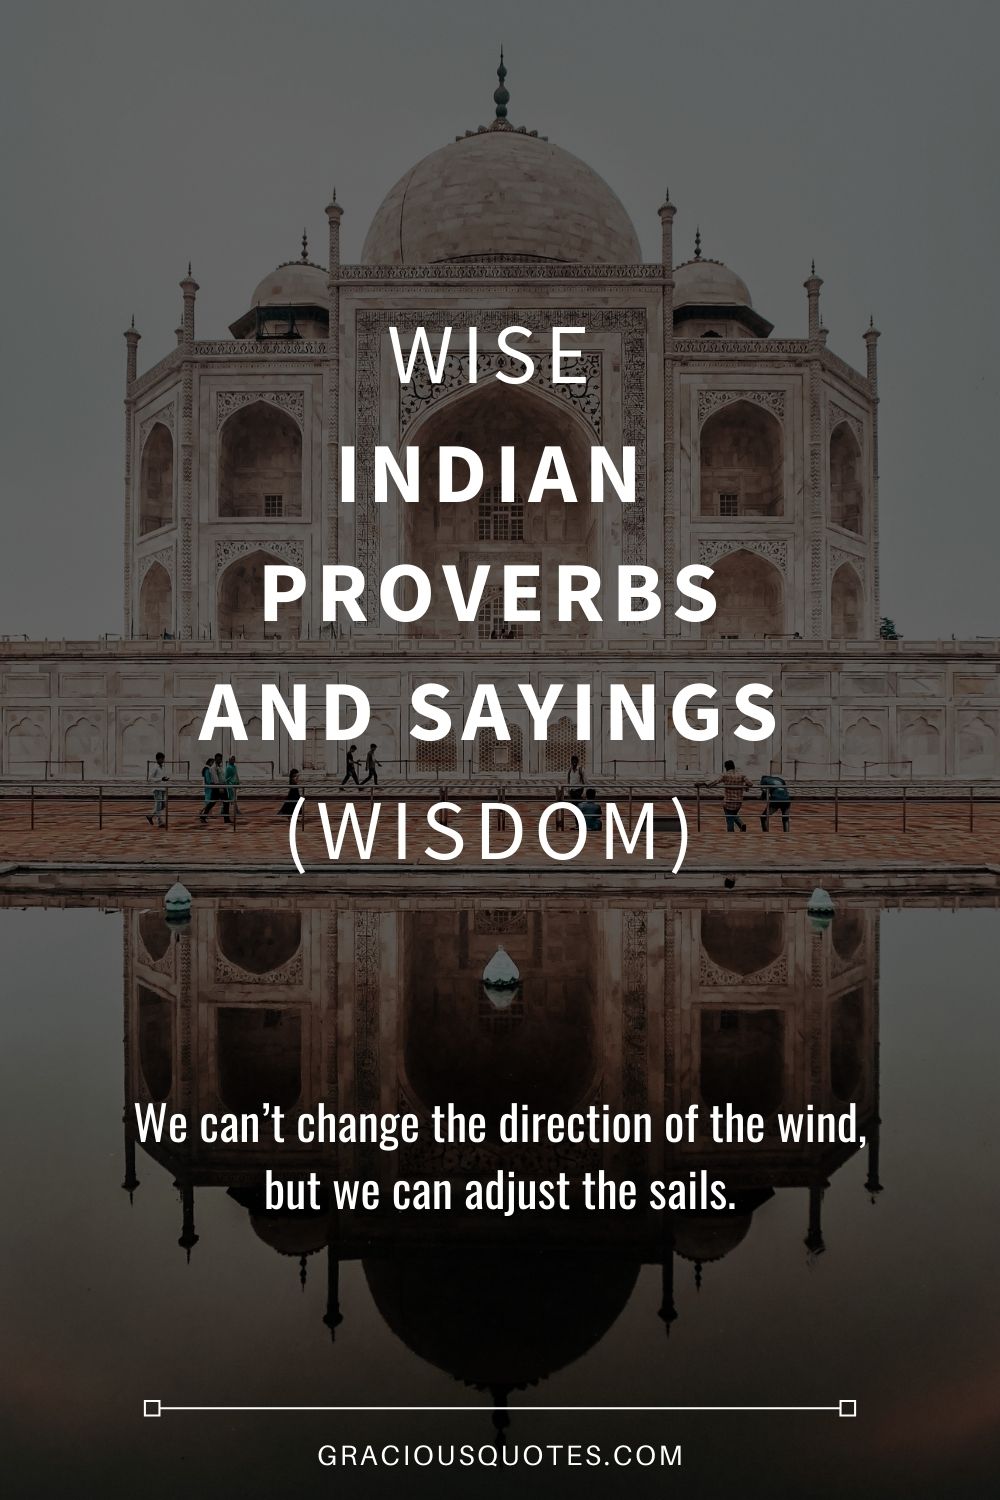 Wise Indian Proverbs and Sayings (WISDOM) - Gracious Quotes